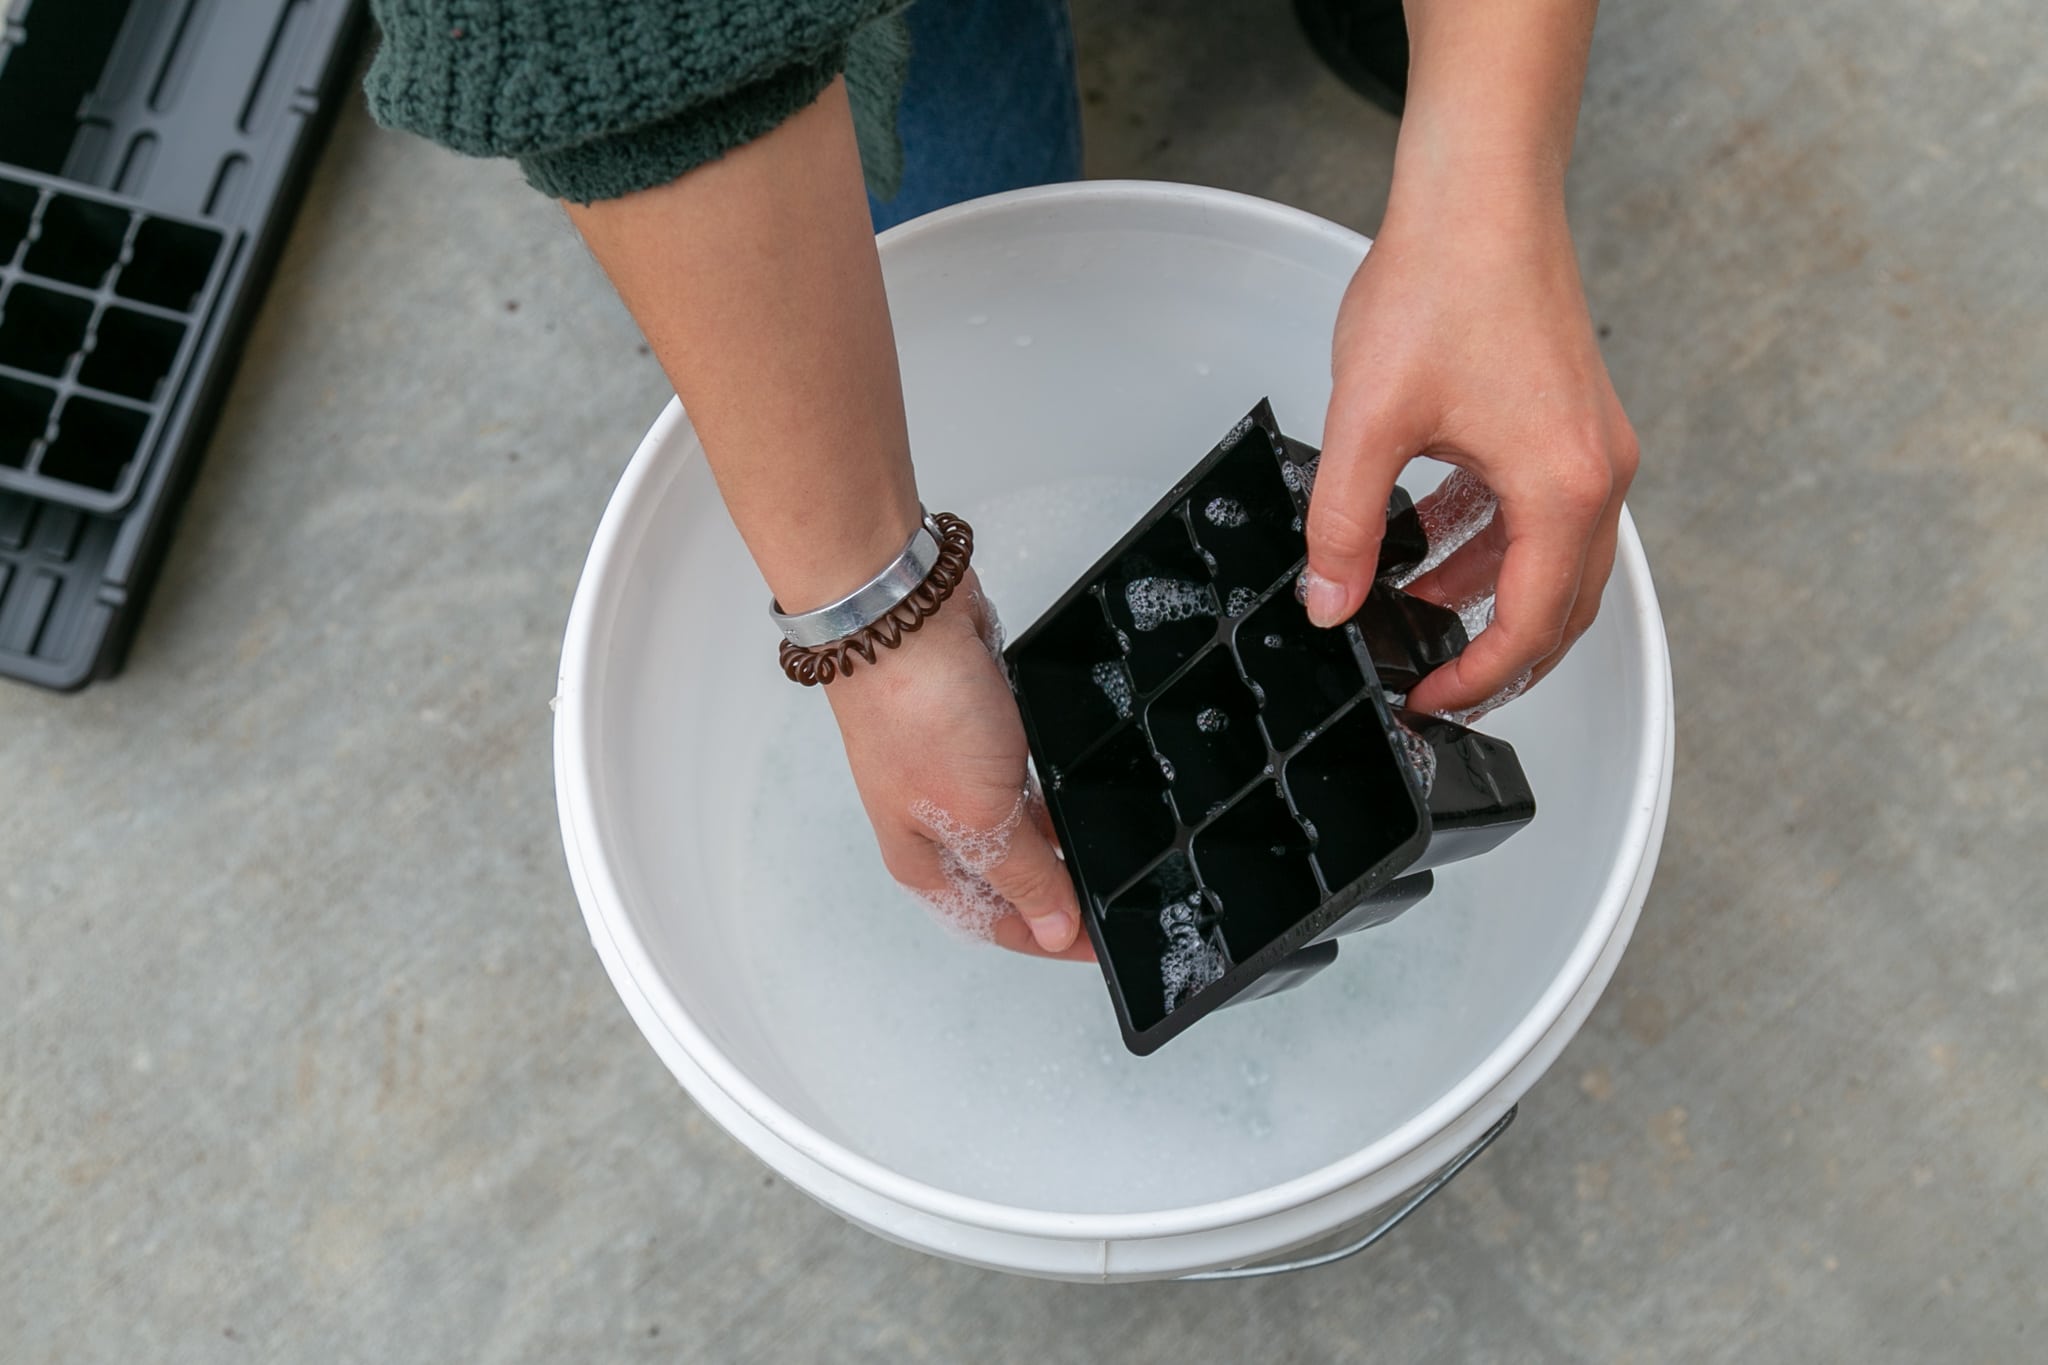 Hands rinsing seed cell trays in warm soapy water